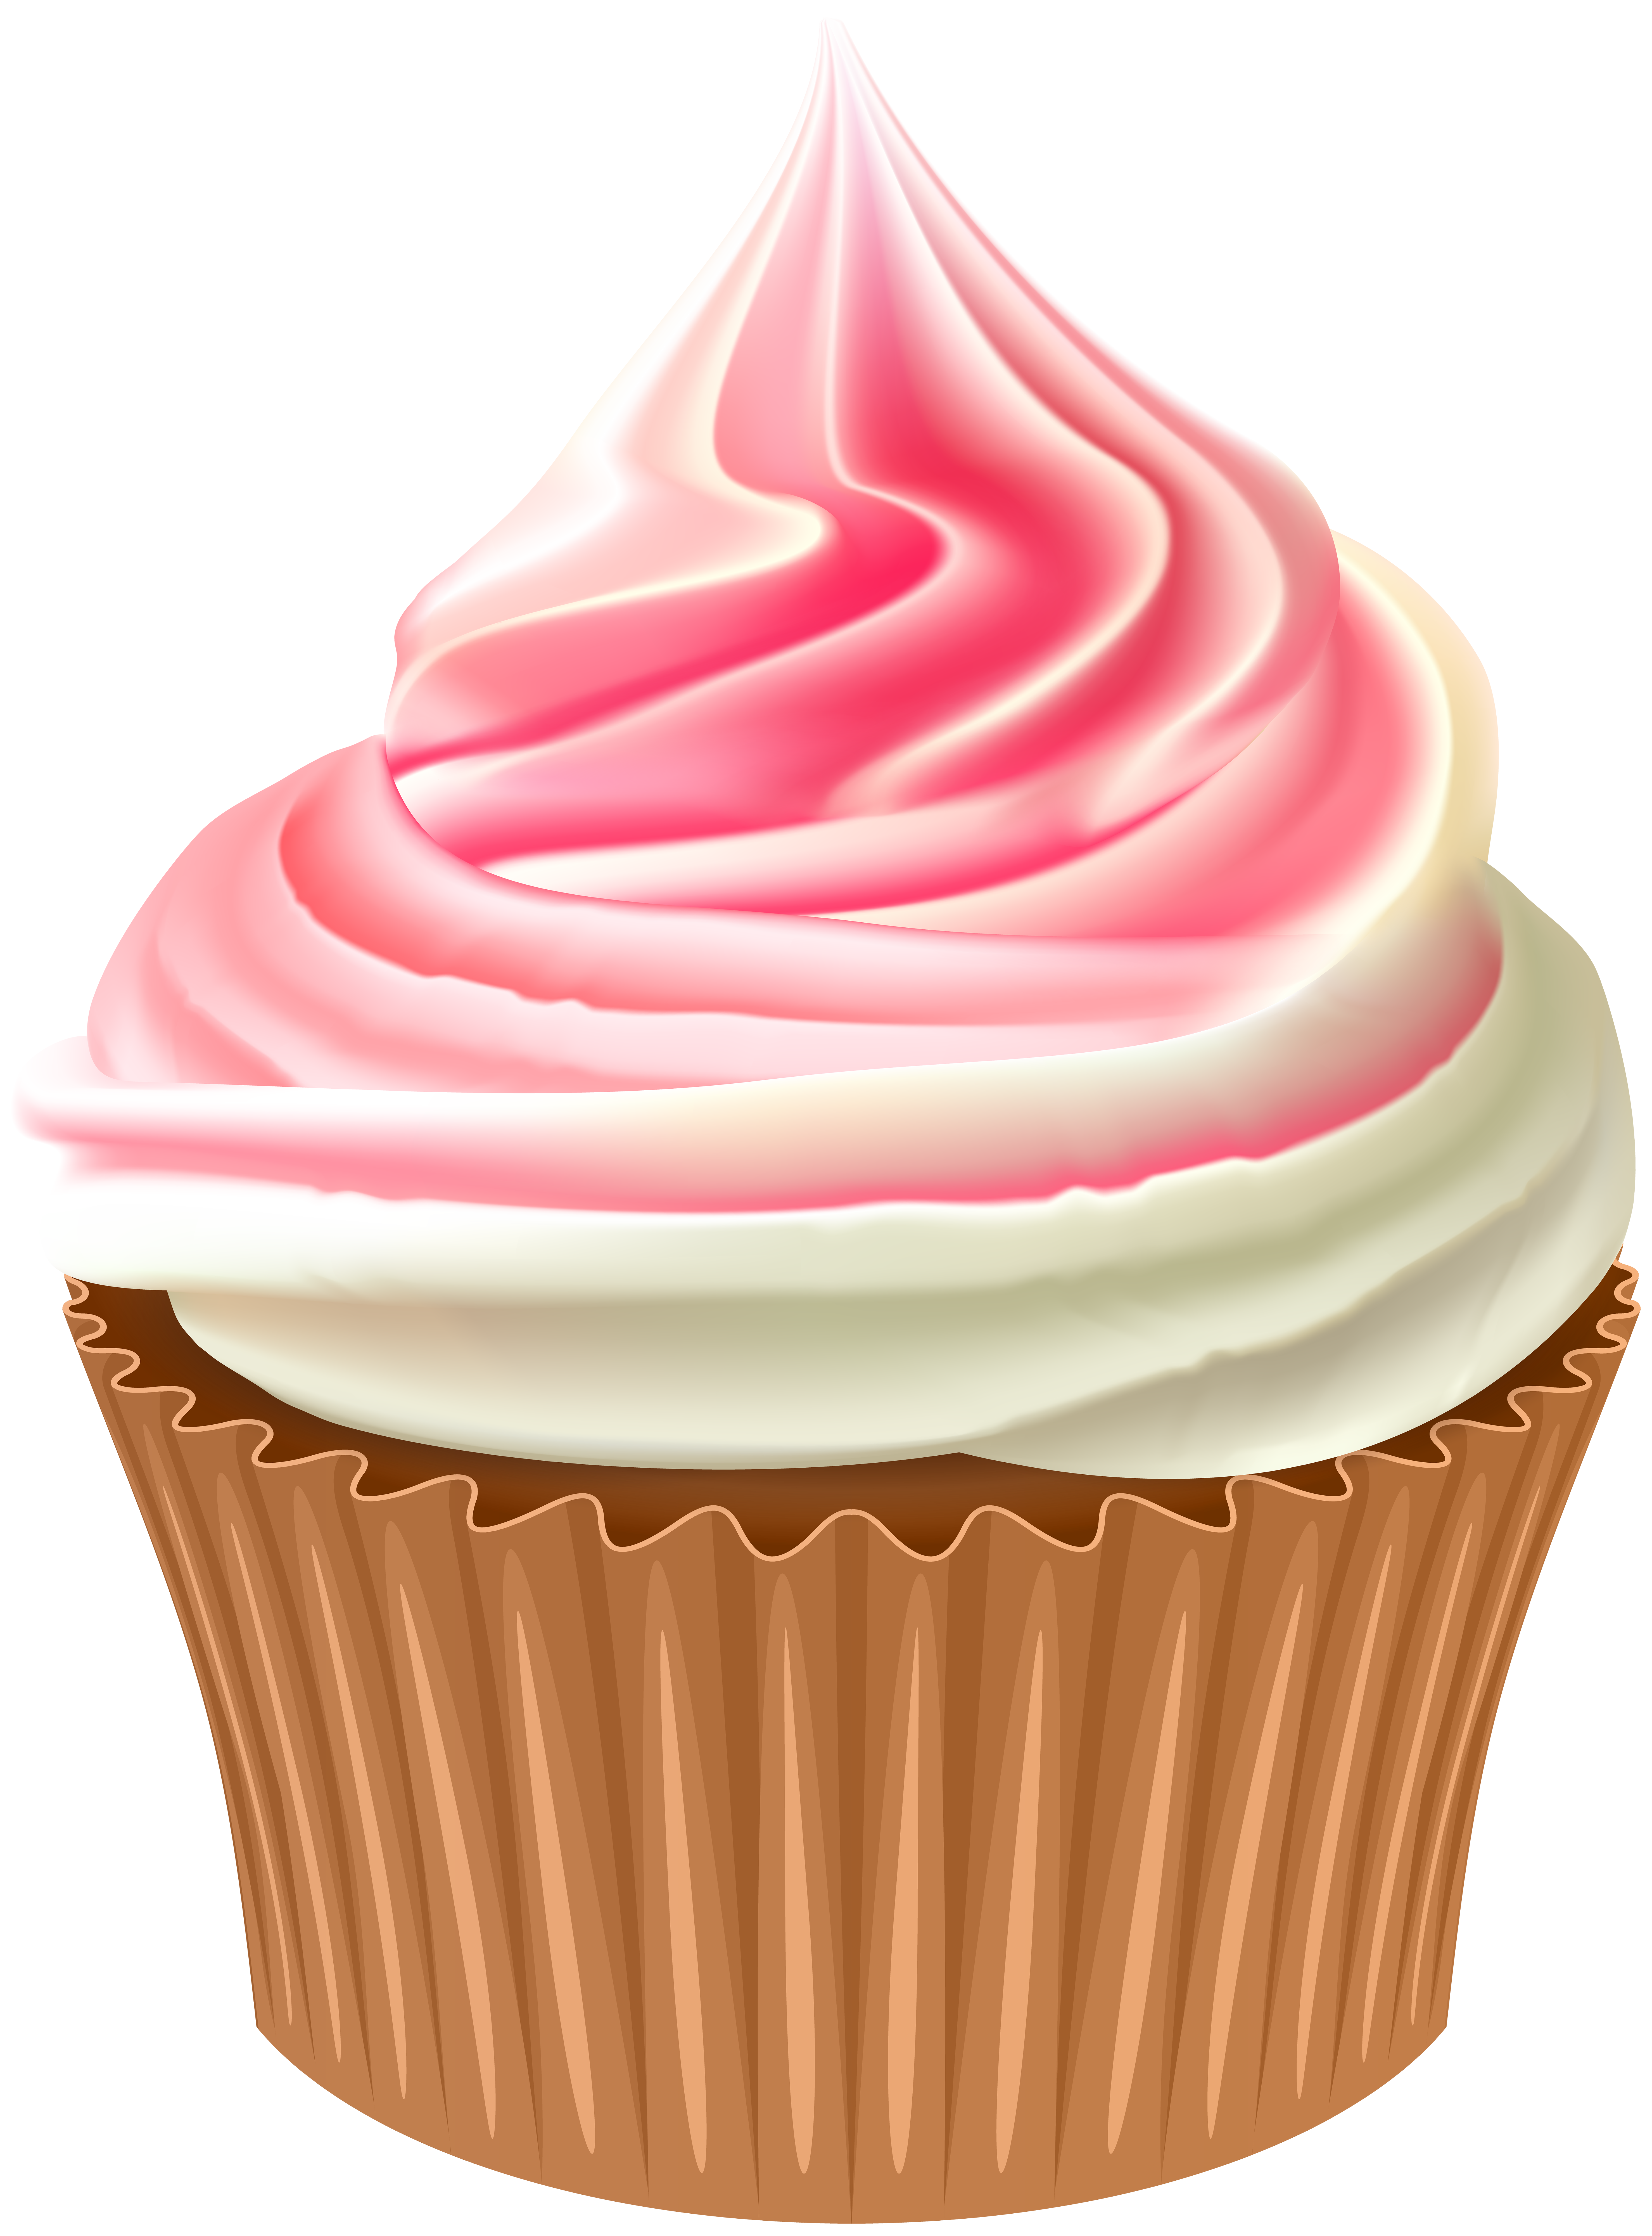 Cupcake Transparent PNG Clip Art Image | Gallery Yopriceville 